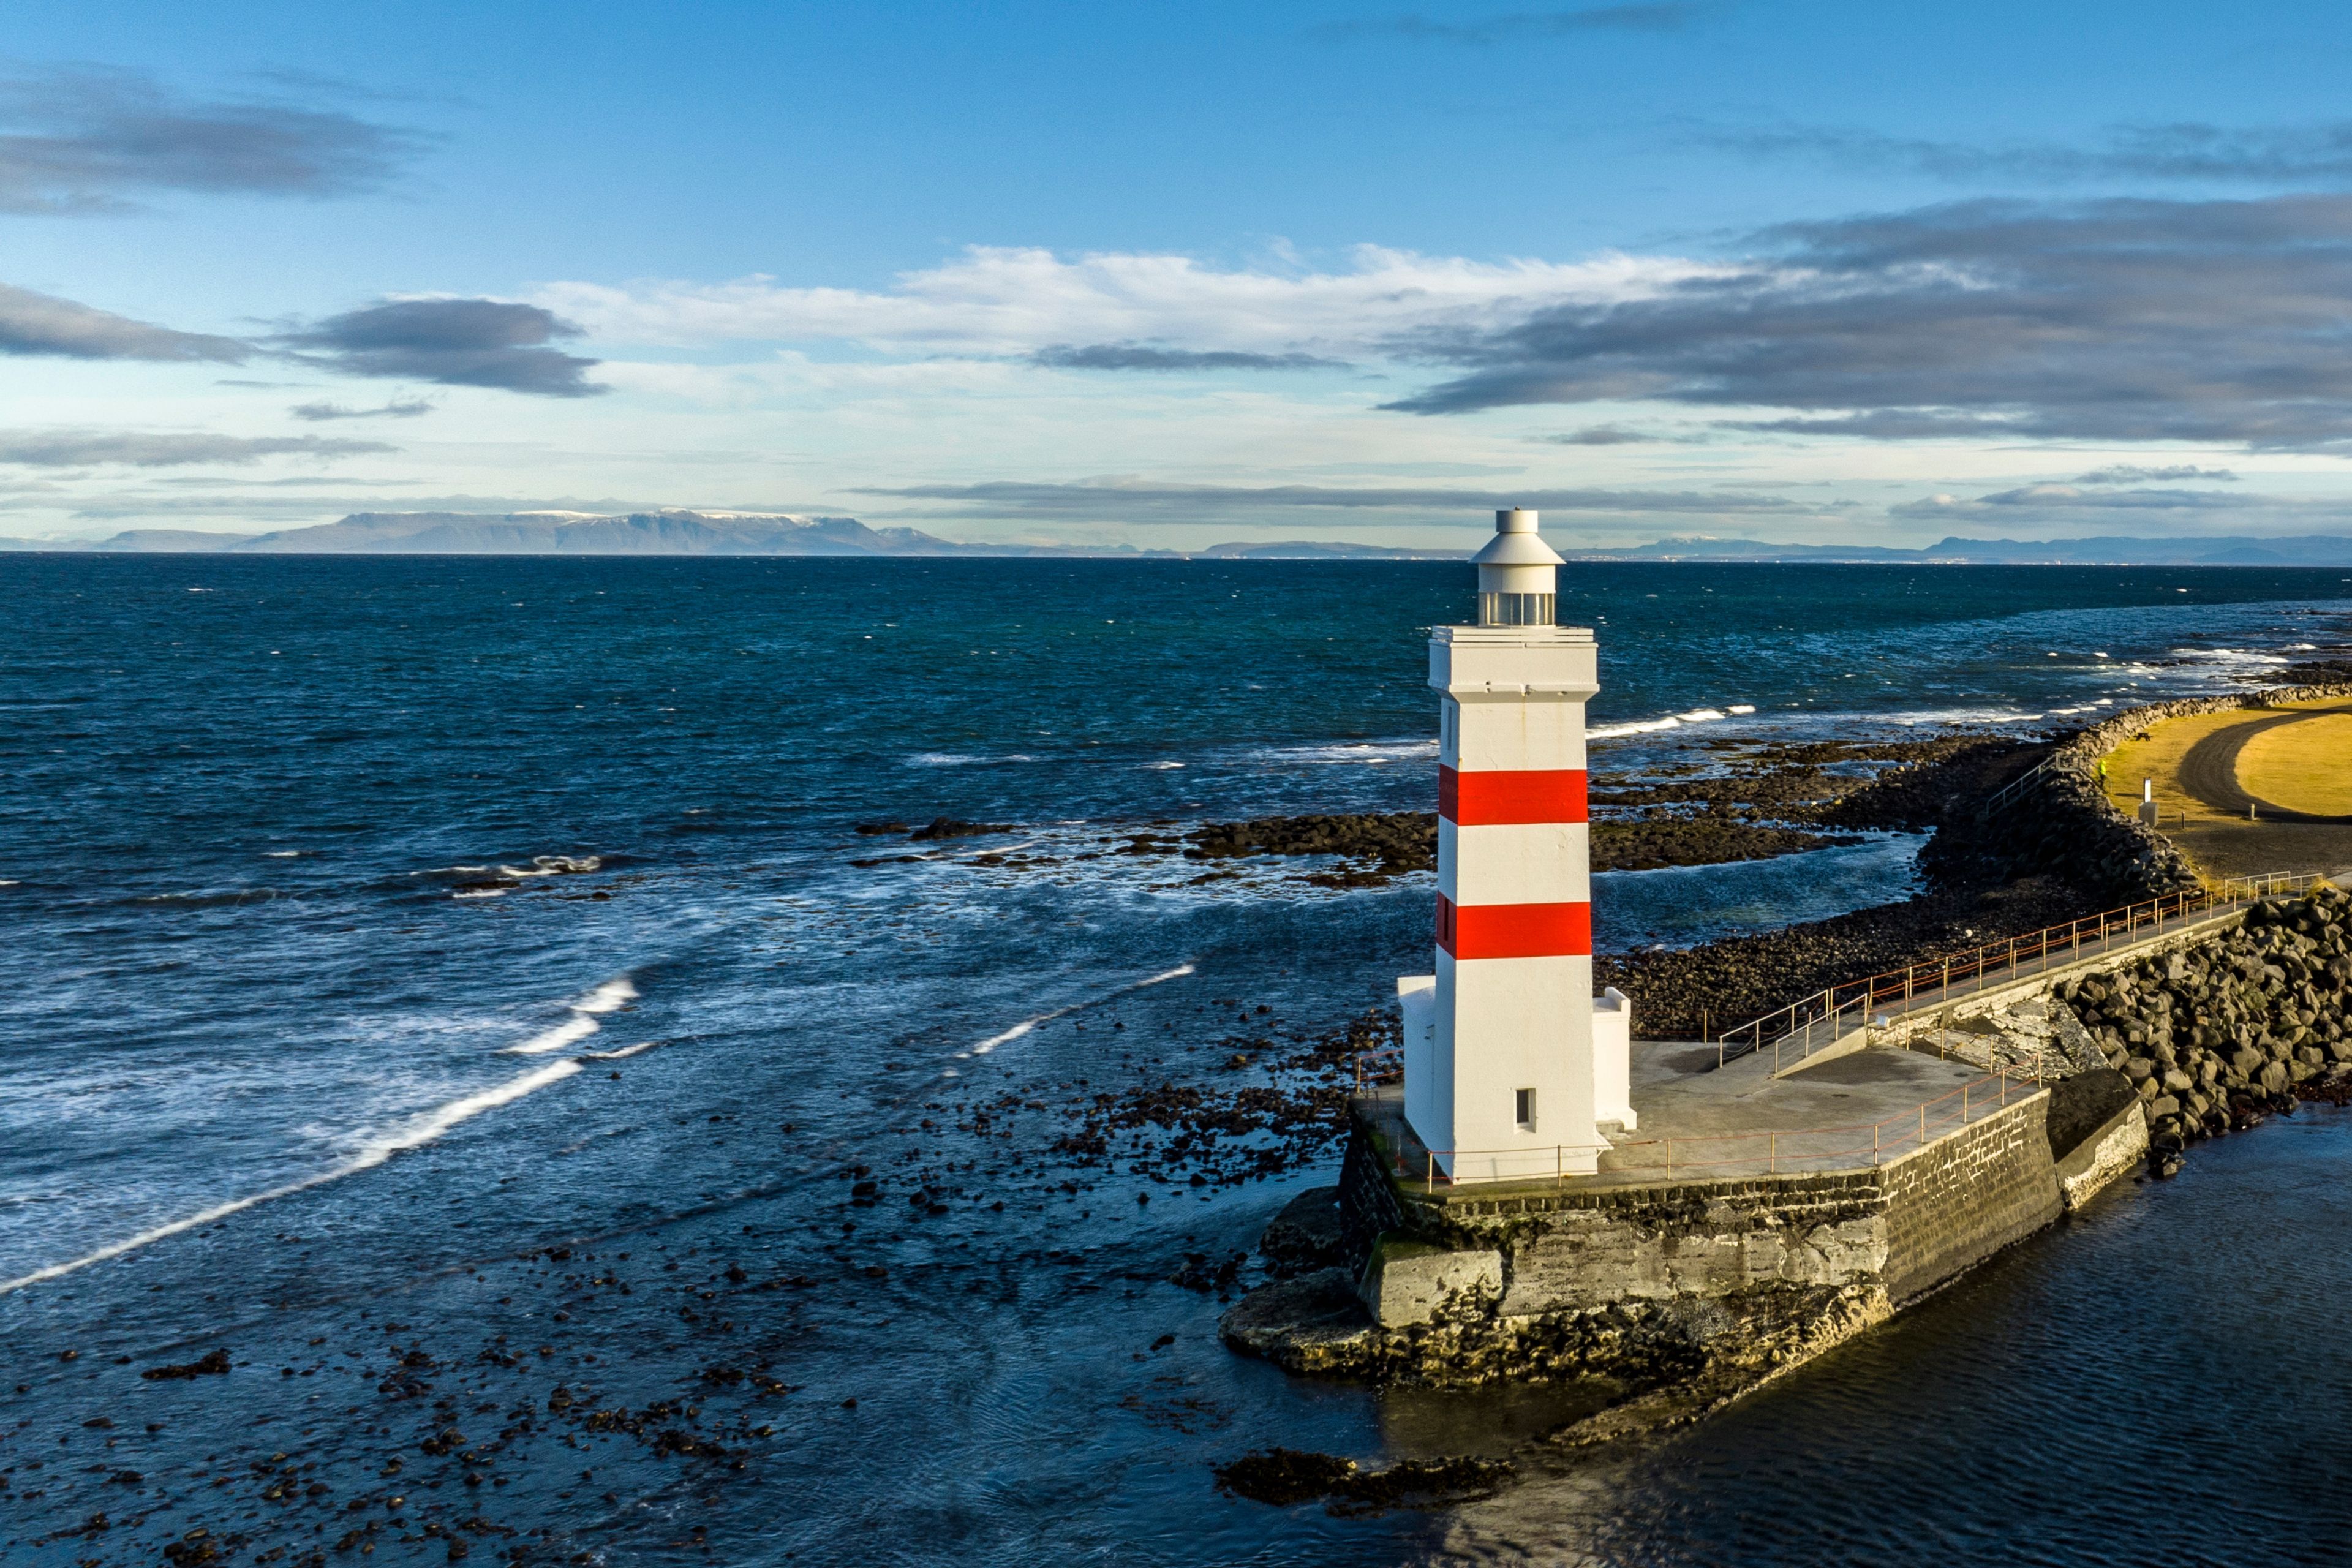 Panoramic view on Garður Old Lighthouse, surrounded by the ocean